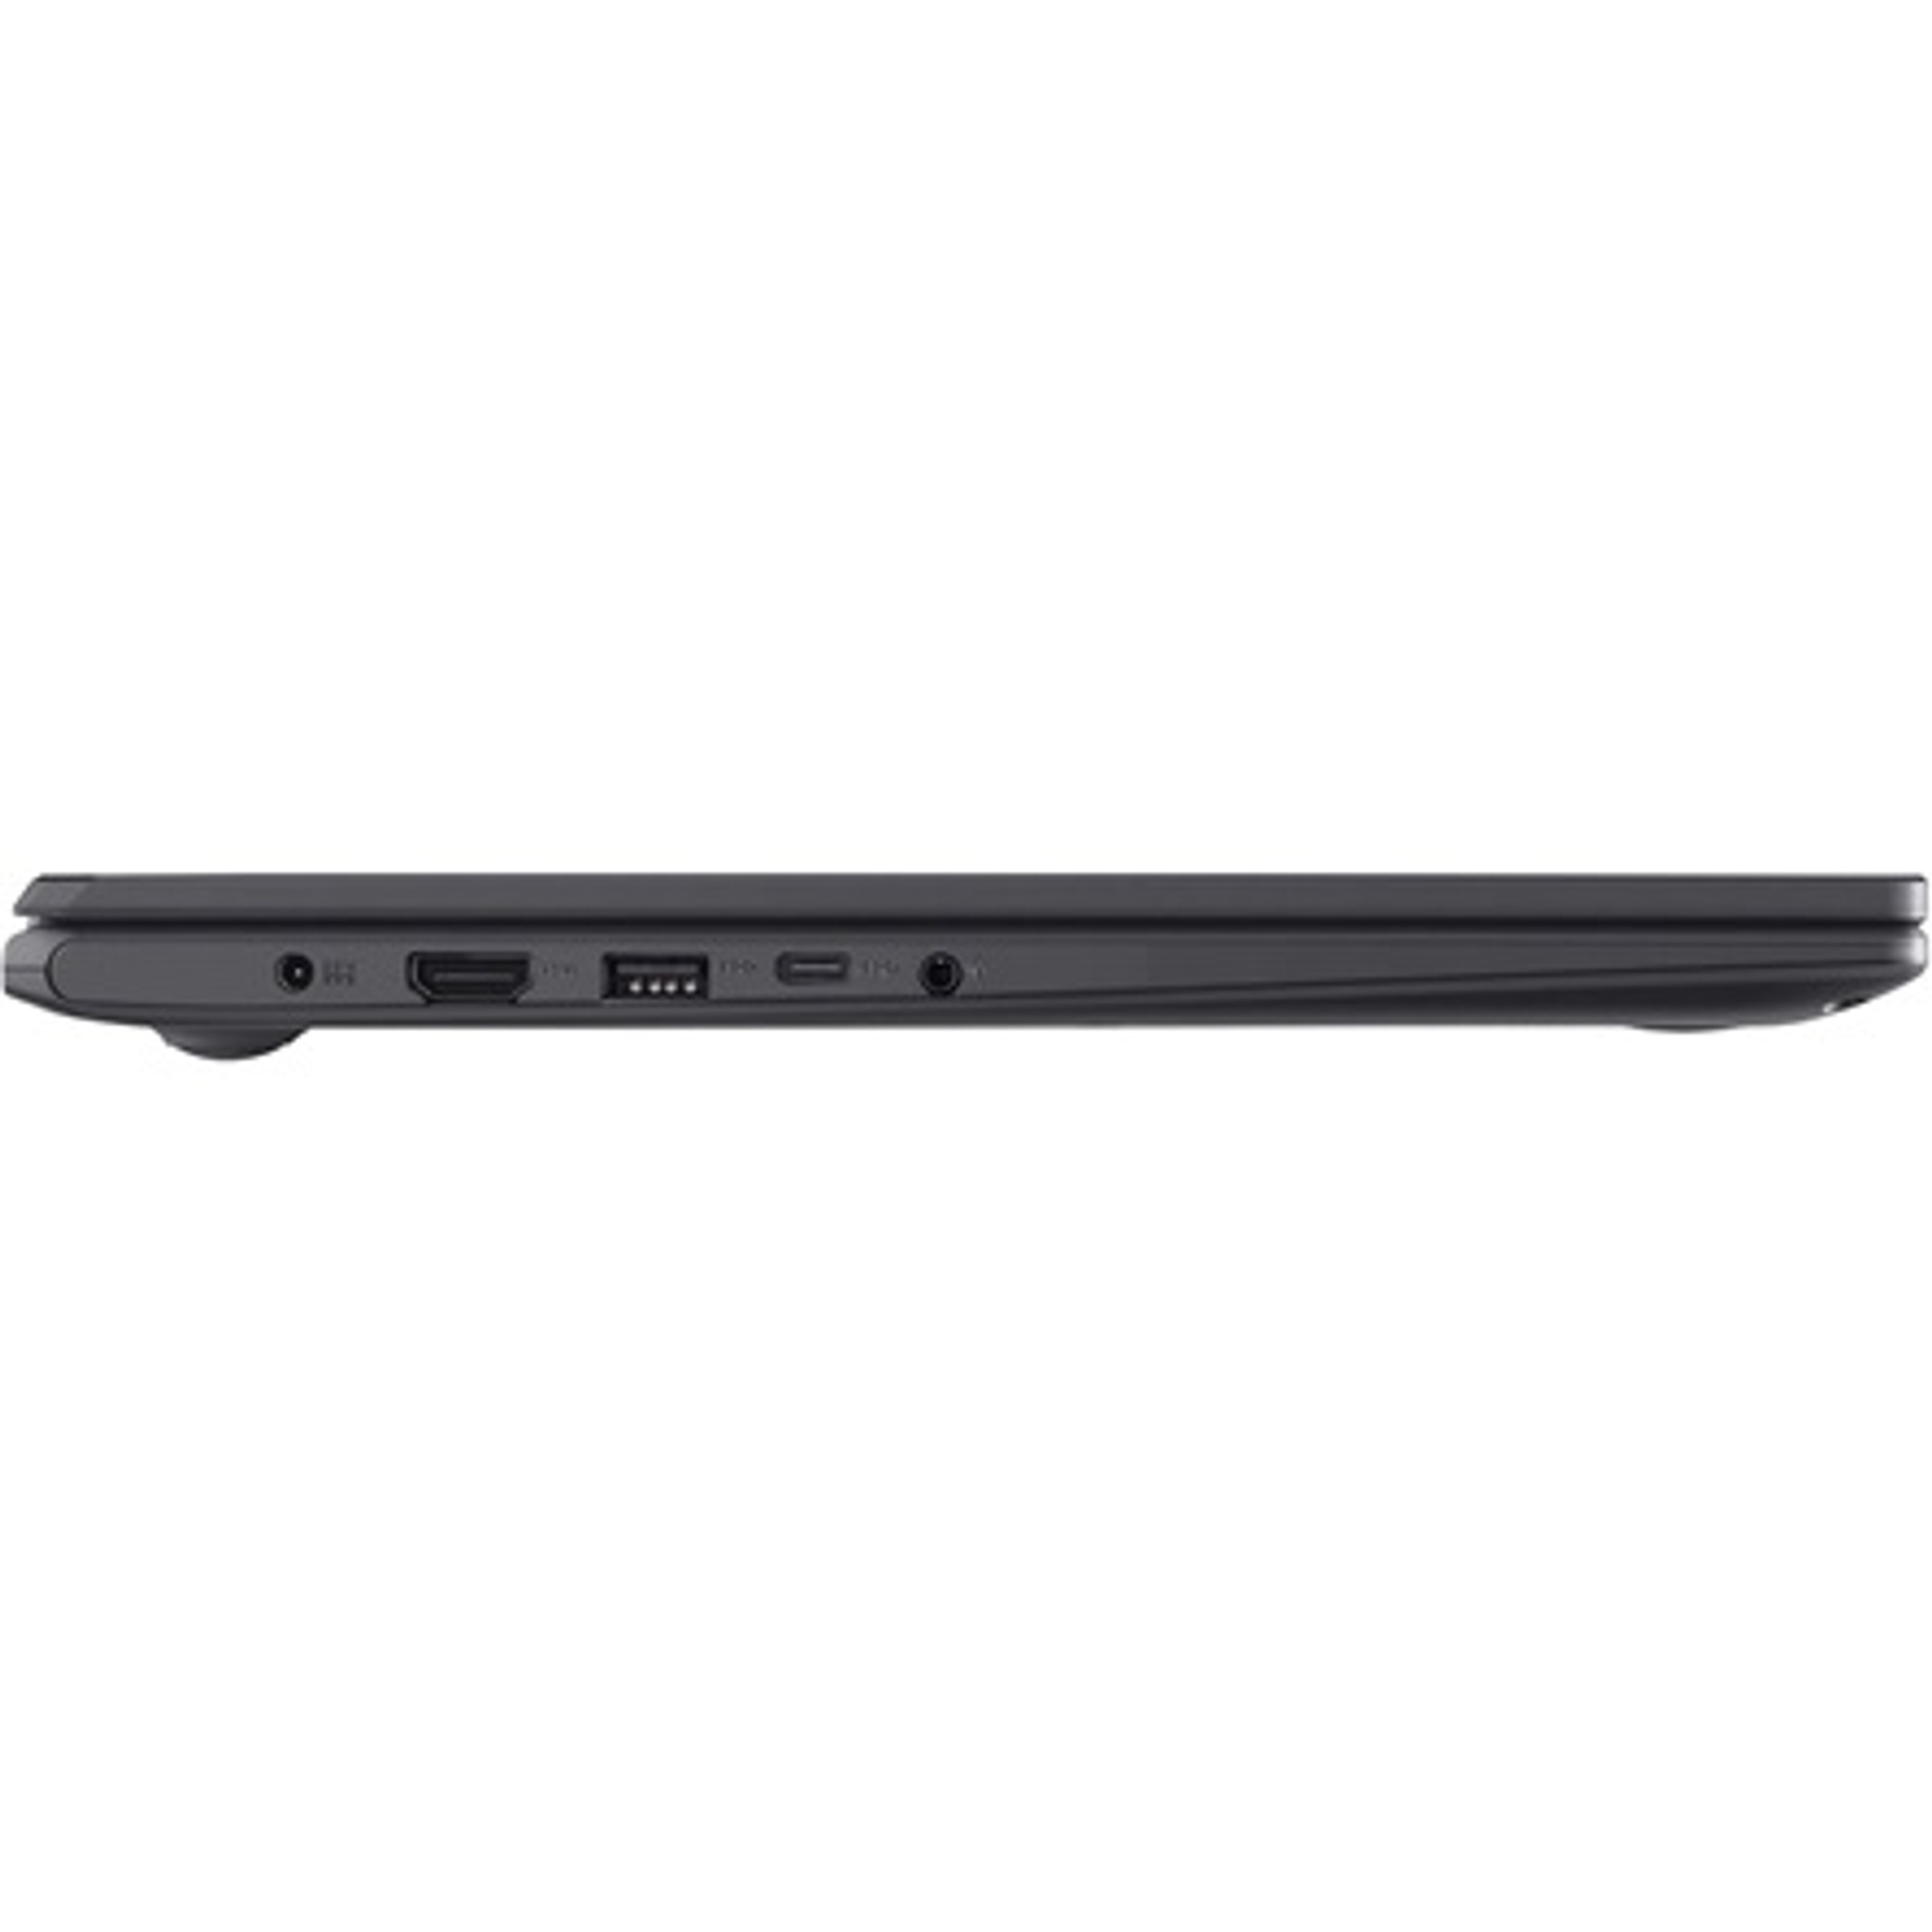 ASUS E510MA-EJ1317WS Laptop / Notebook 4